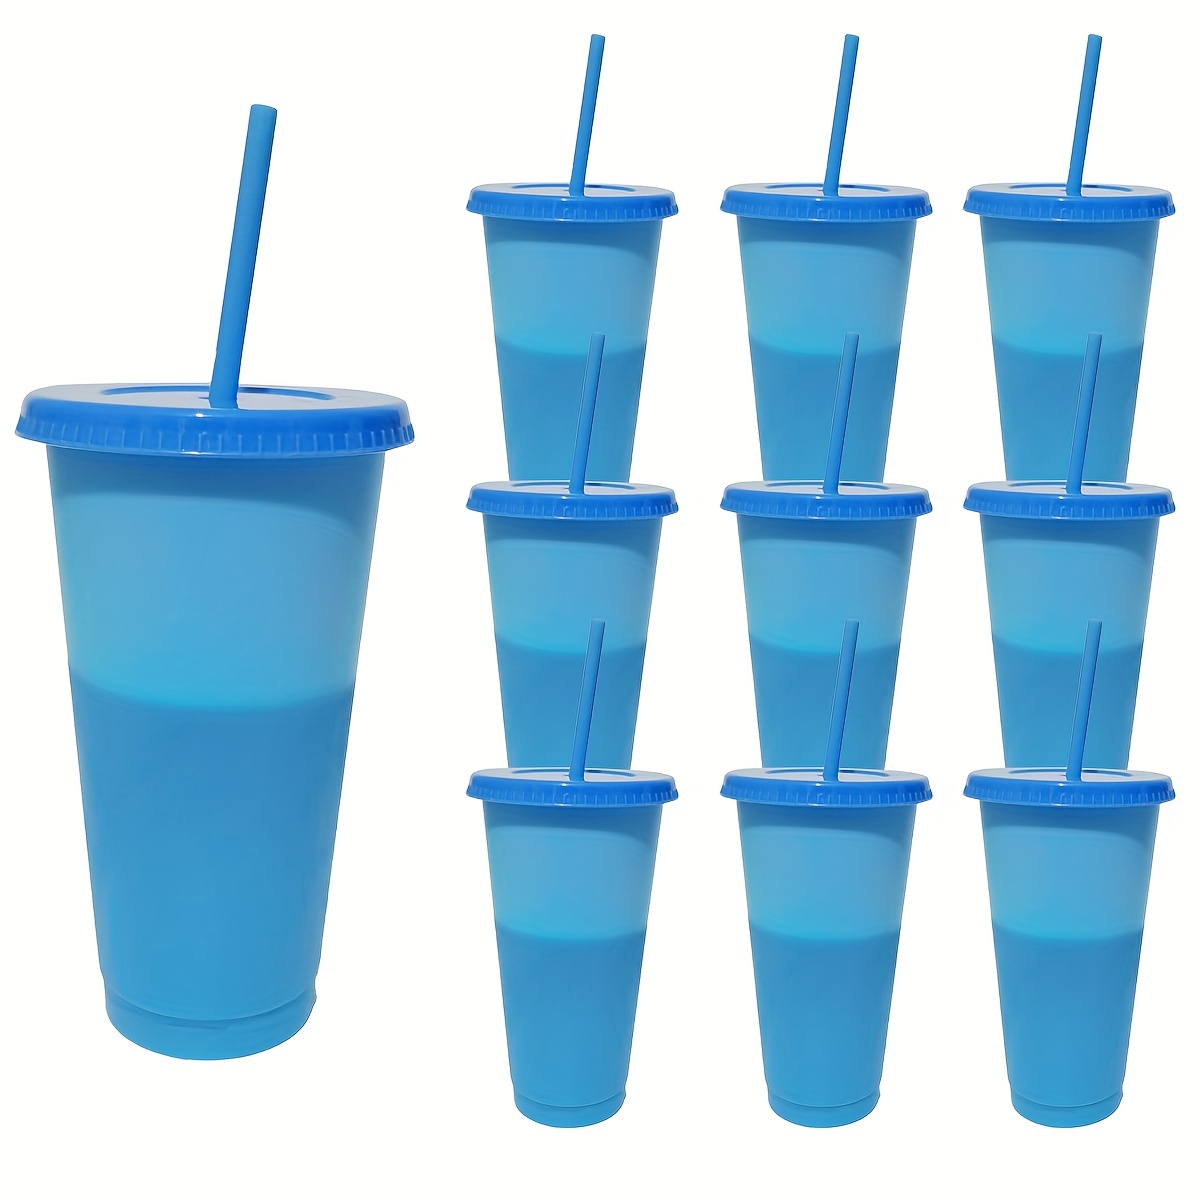 Color Changing Cups, Reusable Plastic Cups with Lids and Straws for Adults